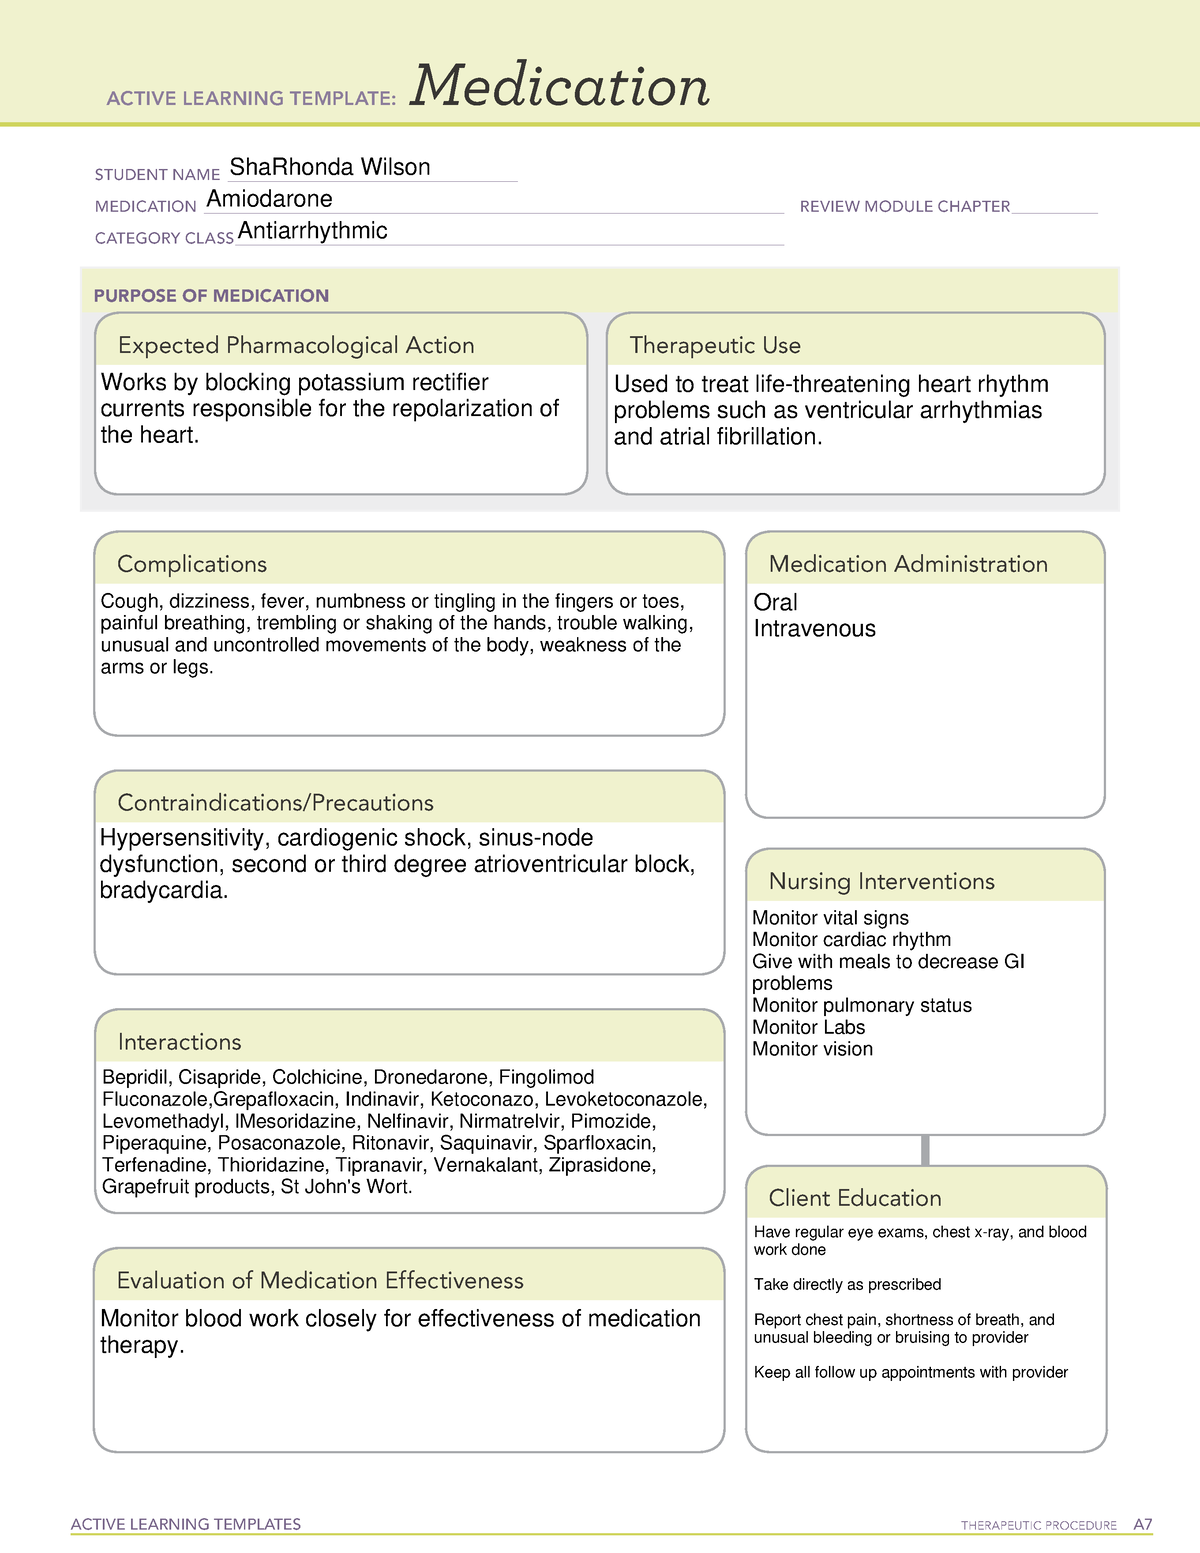 amiodarone-med-template-active-learning-templates-therapeutic-procedure-a-medication-student